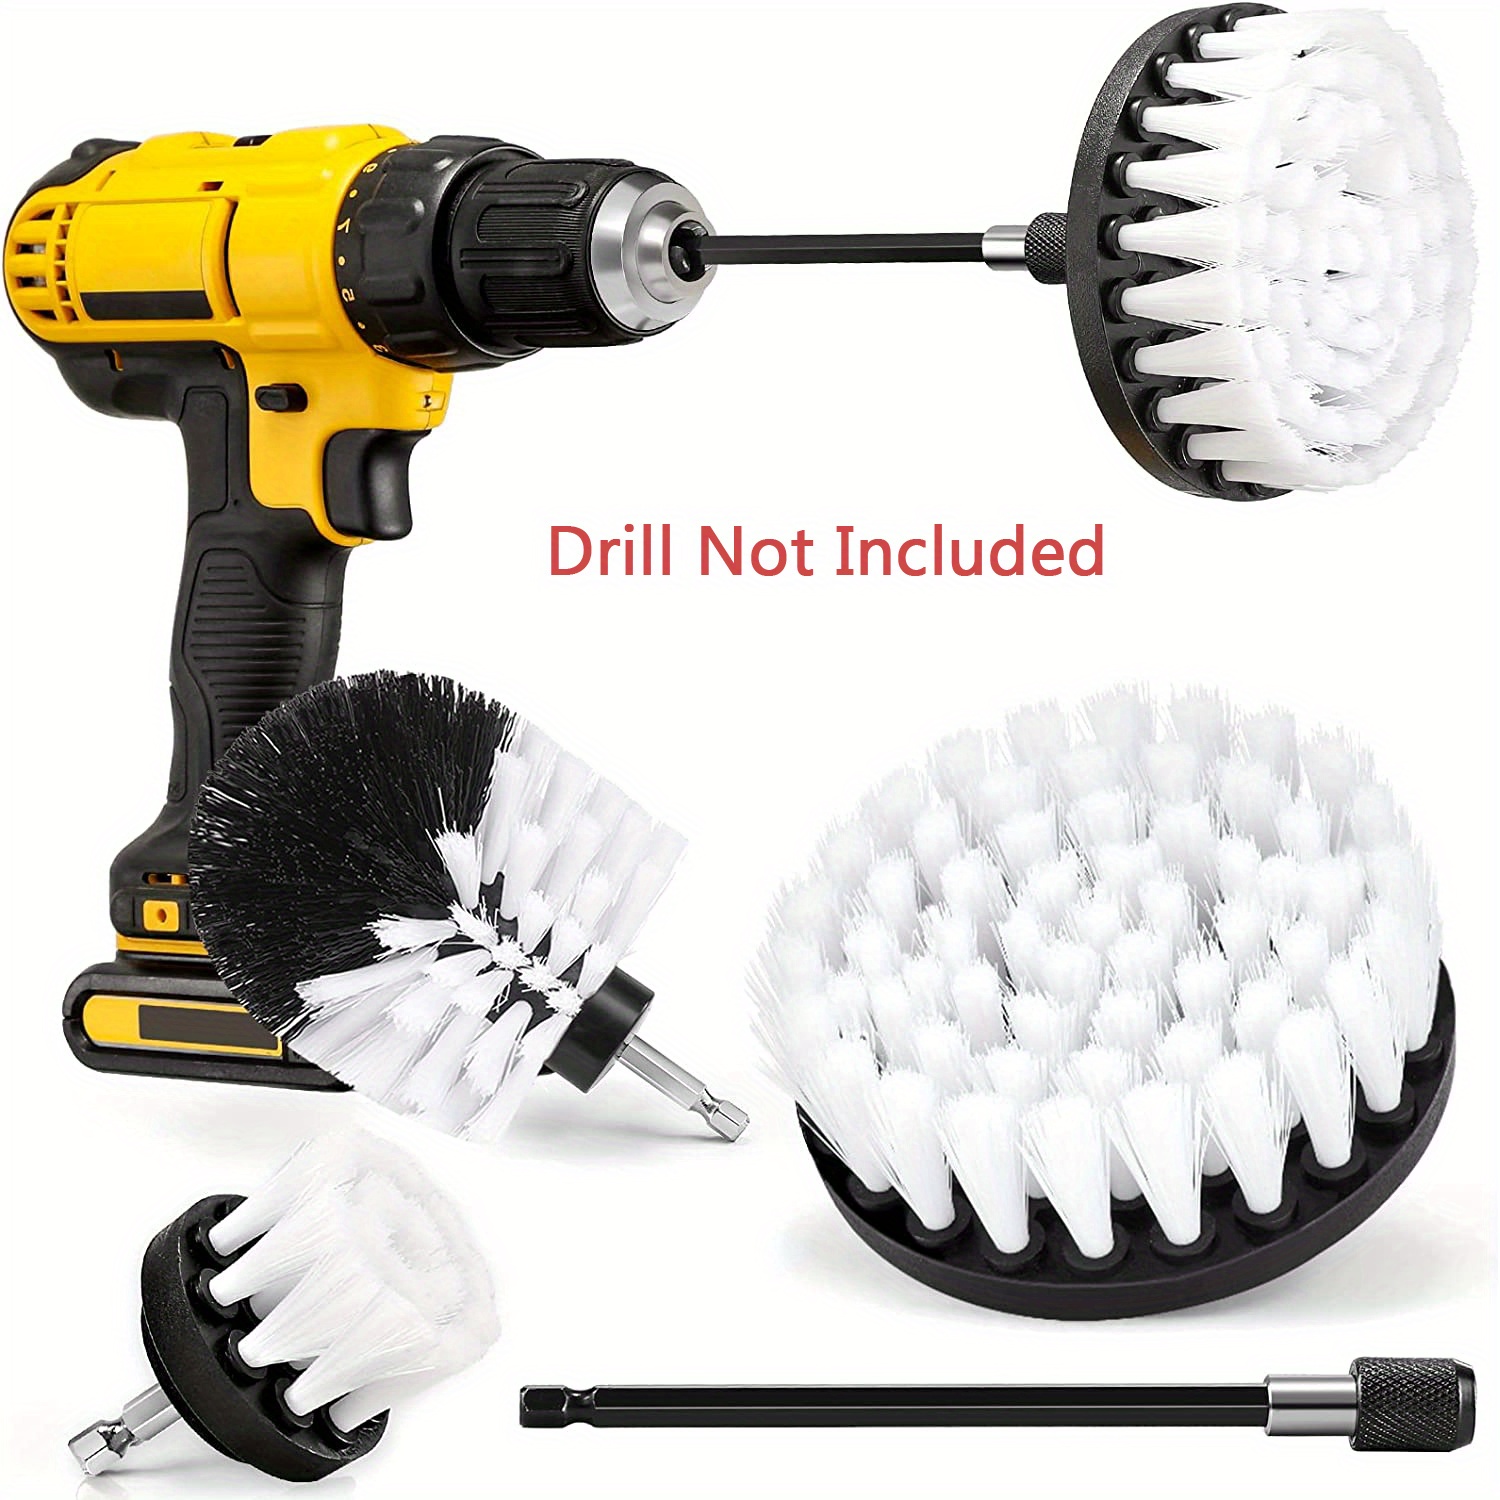 Cleaning Brushes for Cordless Drill - Small Round Boat Accessories Cleaning  Brush - Kitchen Sink Scrub Brush - Car Detailing Rotary Wheel Brush -  Shower Cleaner Brush for Drill - Tile and Grout Brush 